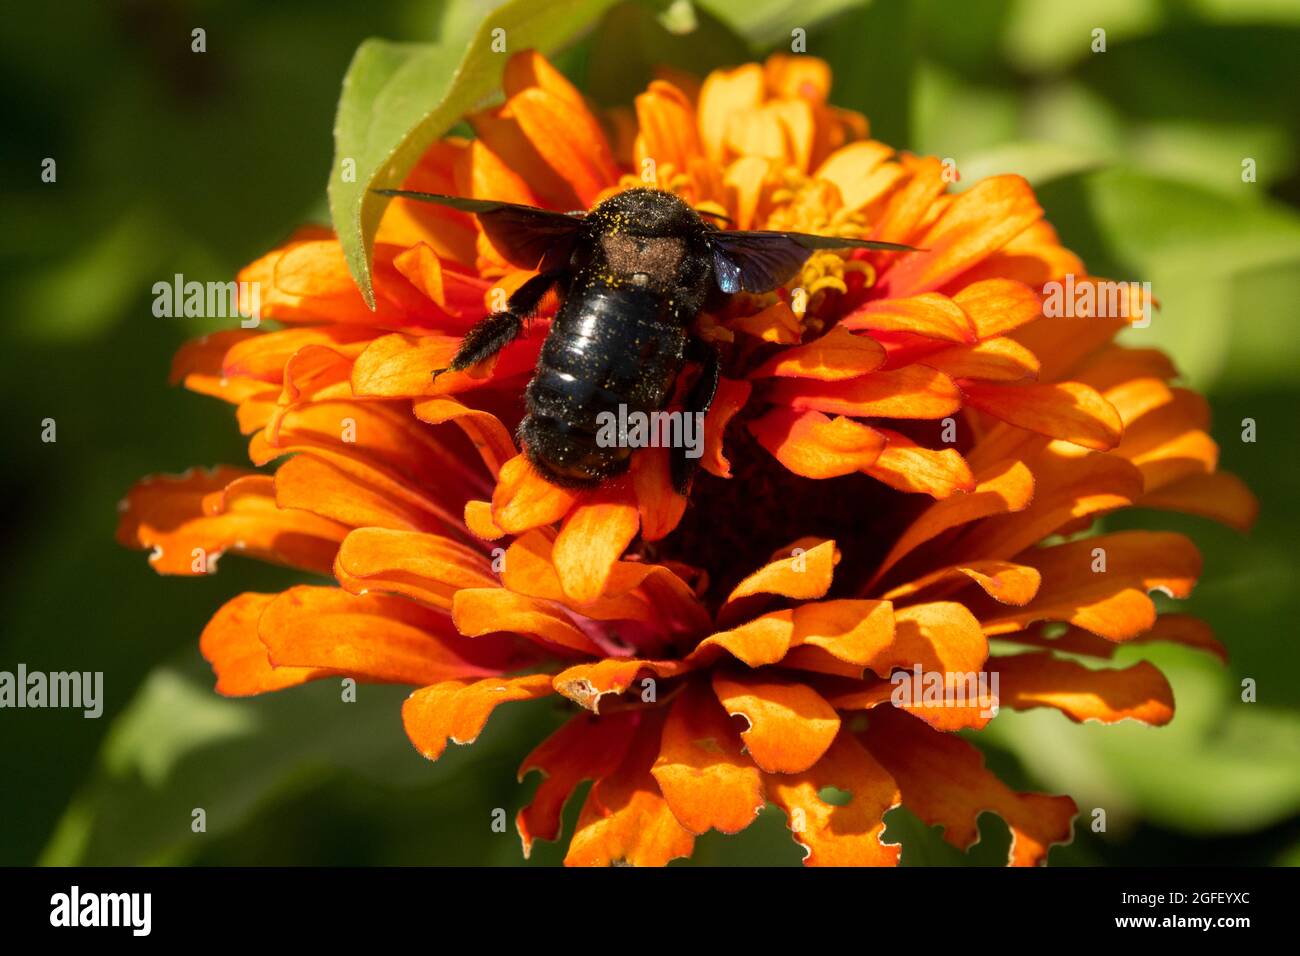 Large violet carpenter bee on Flower Close up Orange Zinnia 'Orange King' Xylocopa violacea Solitary bee Foraging Insect In Bloom Zinnia Bee Plant Stock Photo